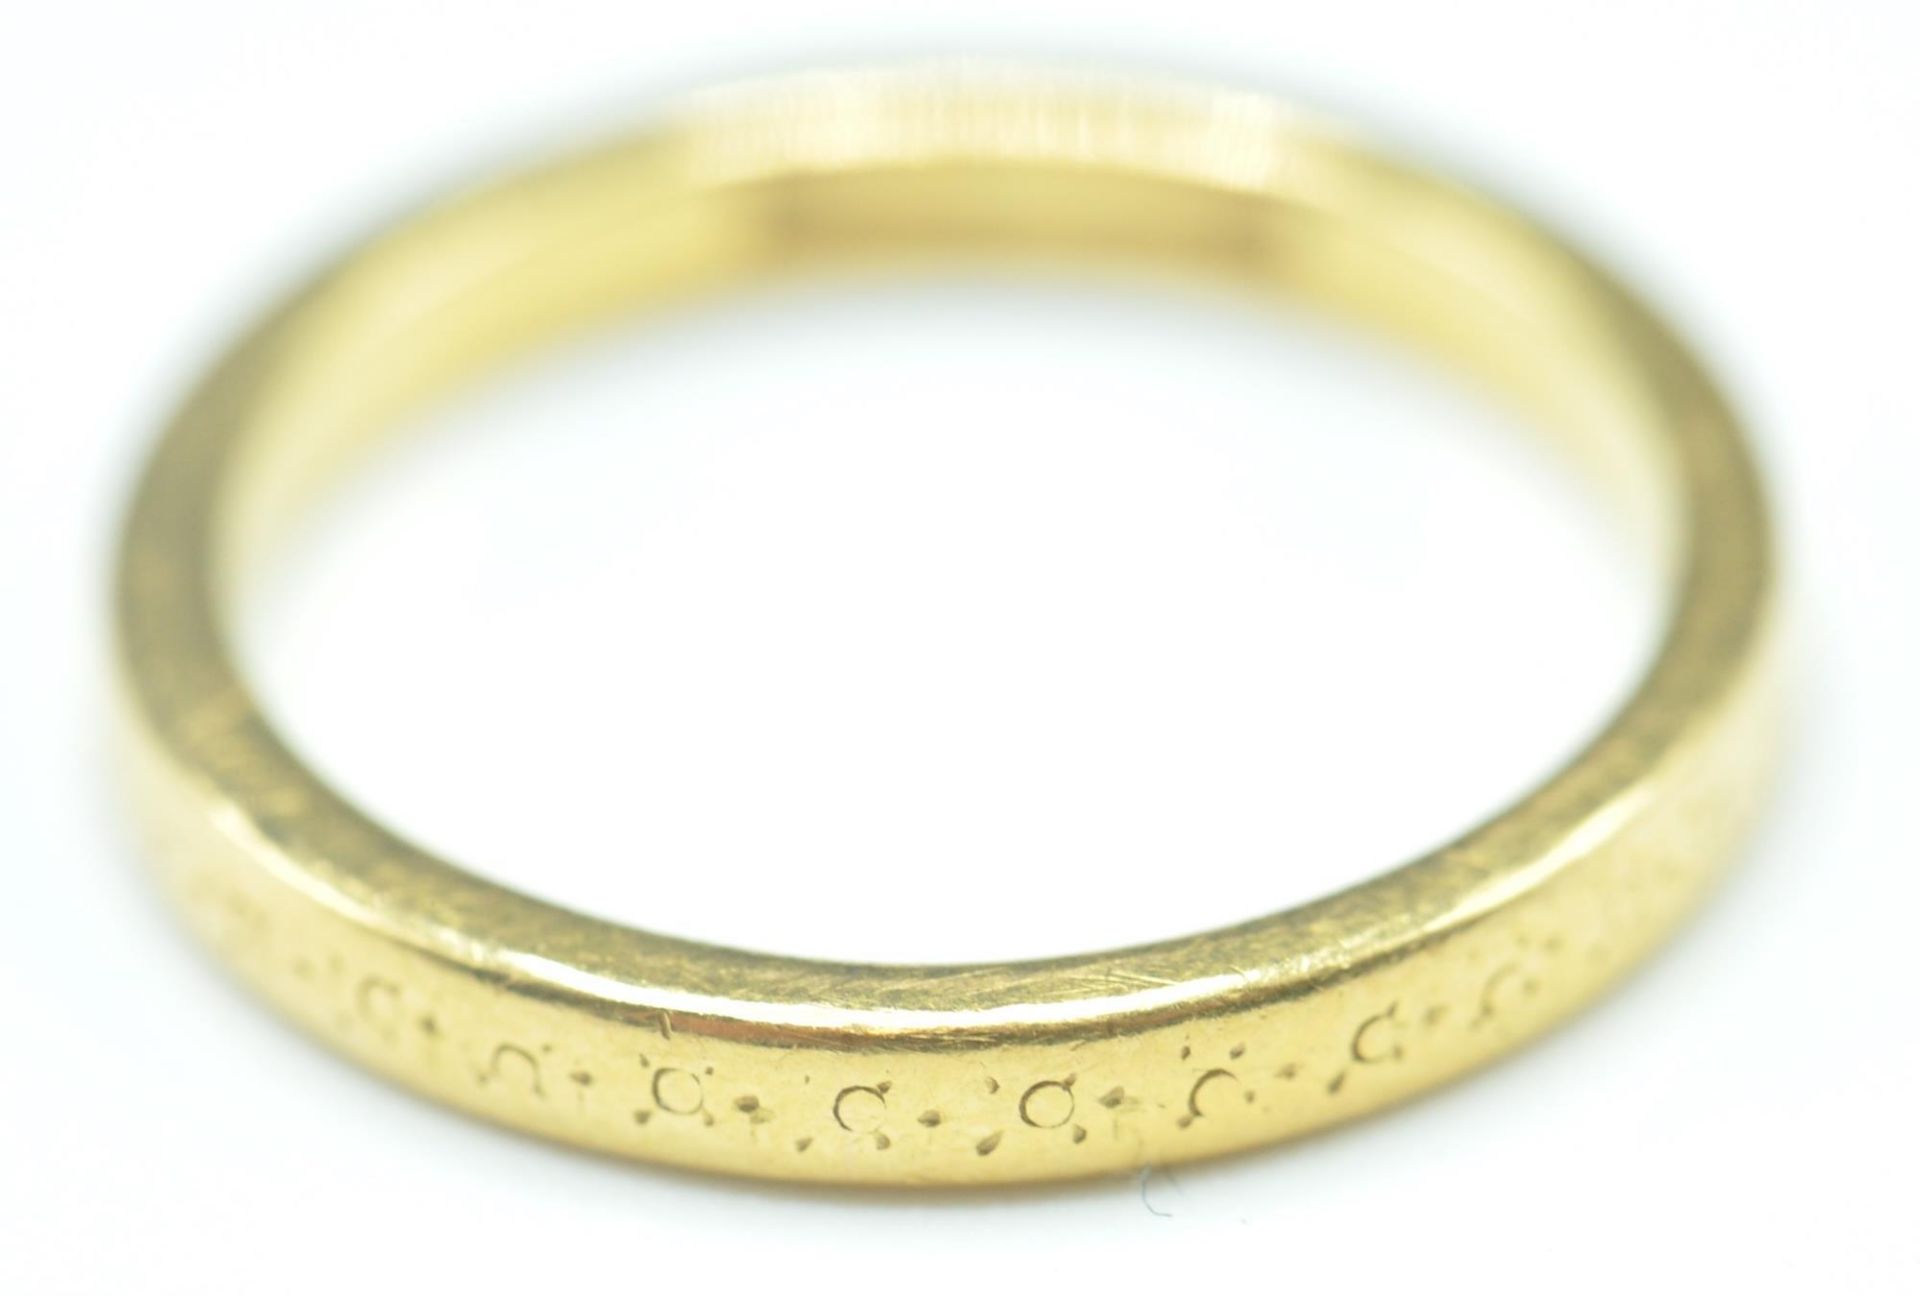 ANTIQUE GOLD WEDDING BAND RING WITH ENGRAVED DECORATION